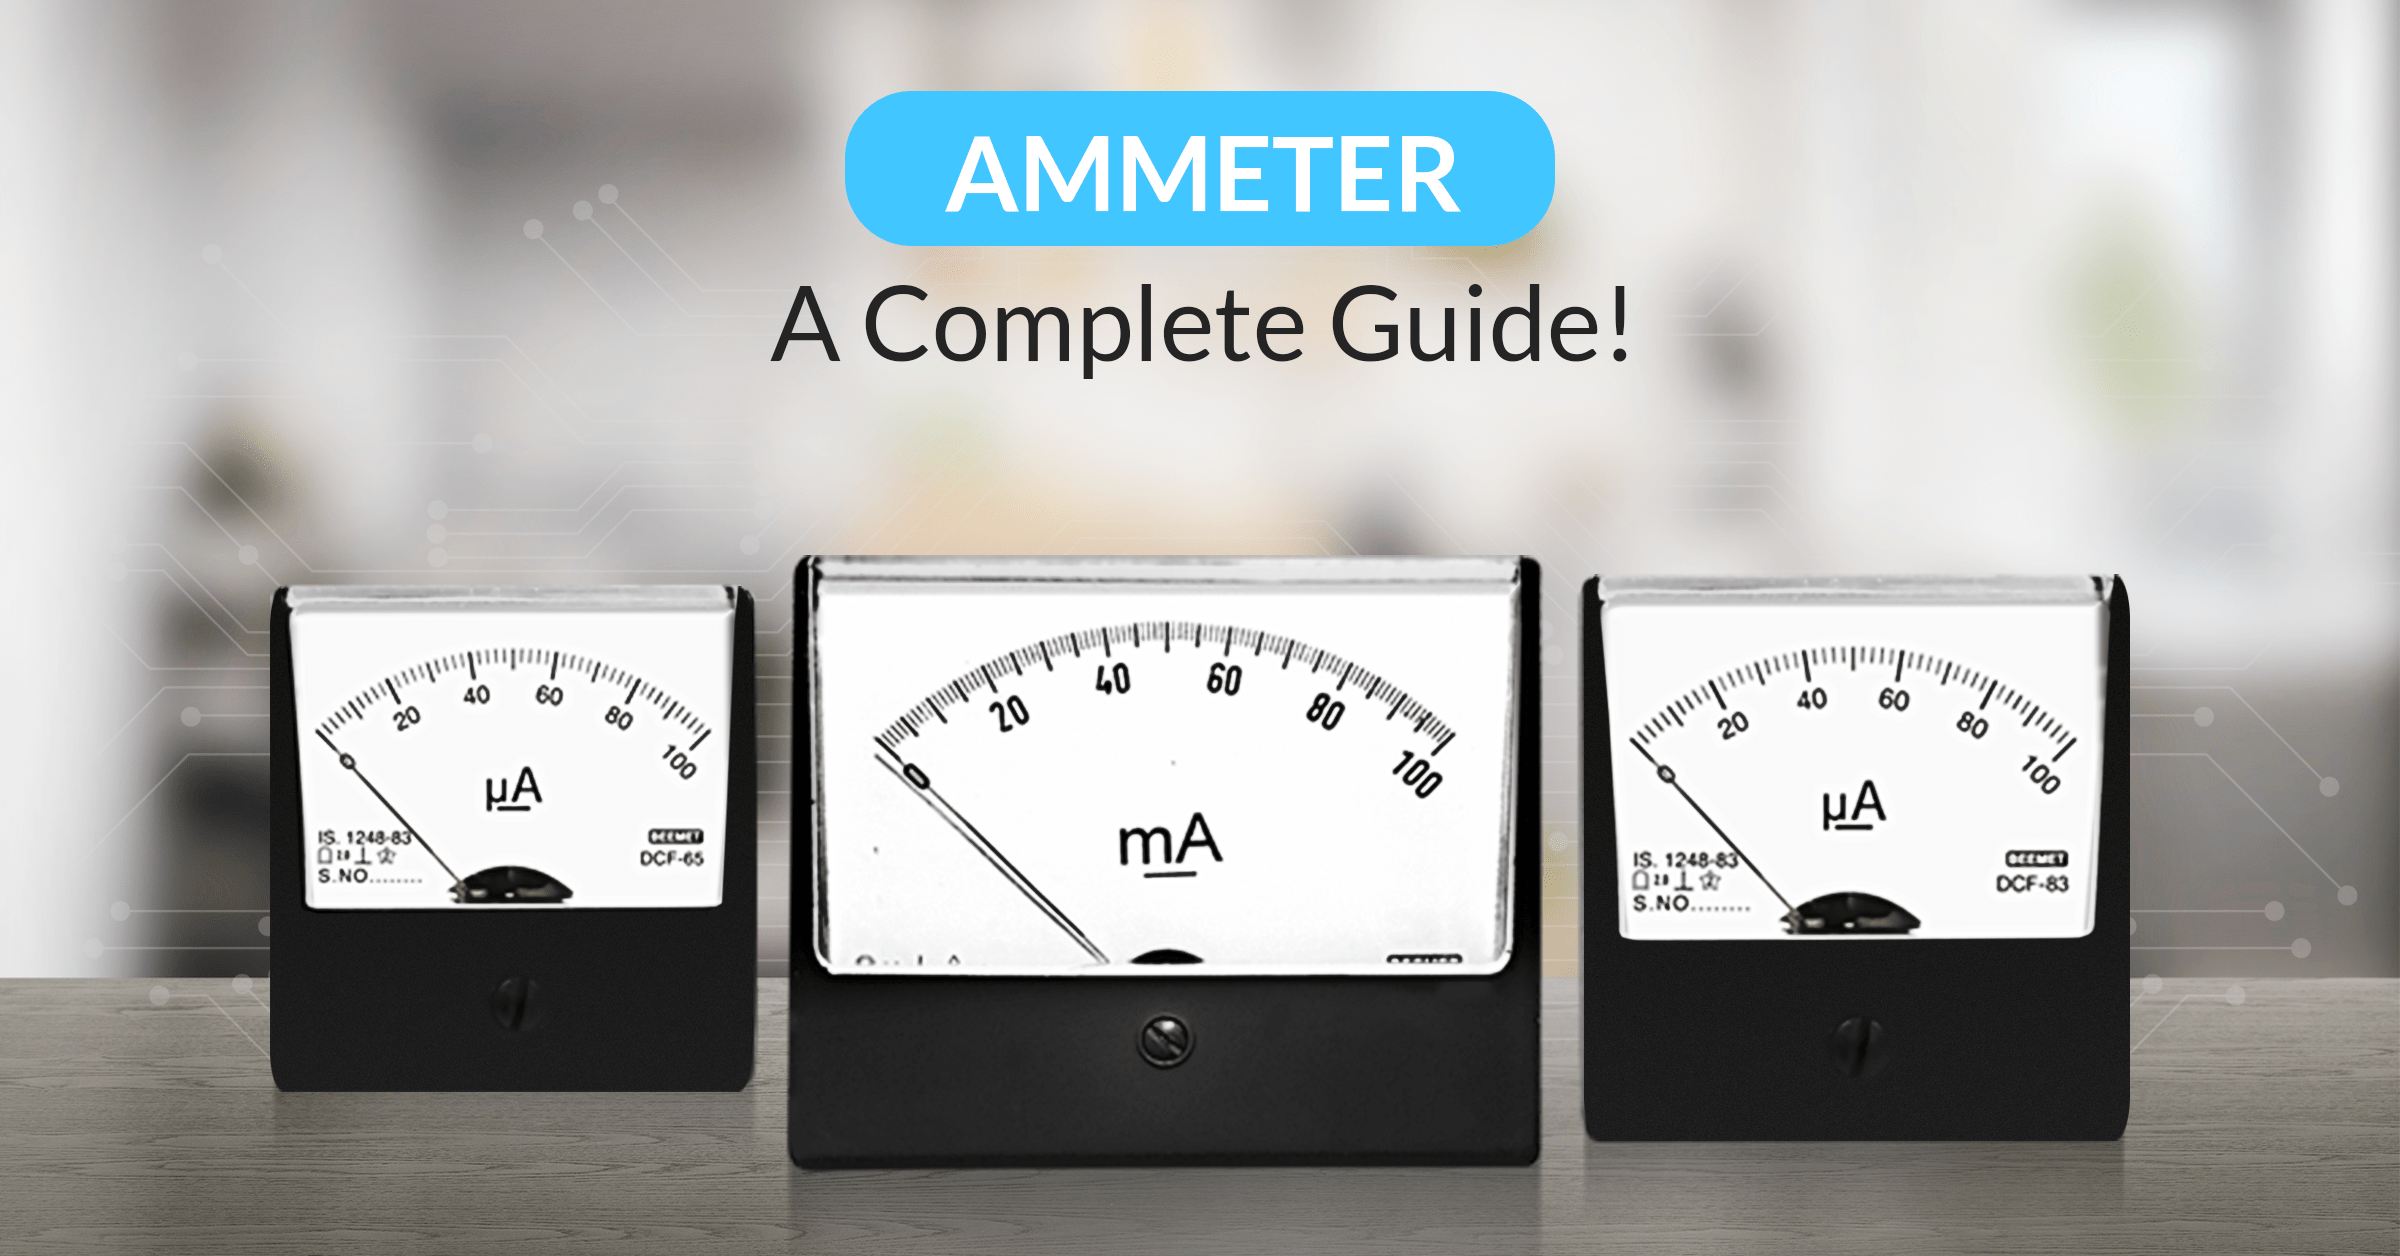 Feature images for our blog on Ammeter - a complete guide!